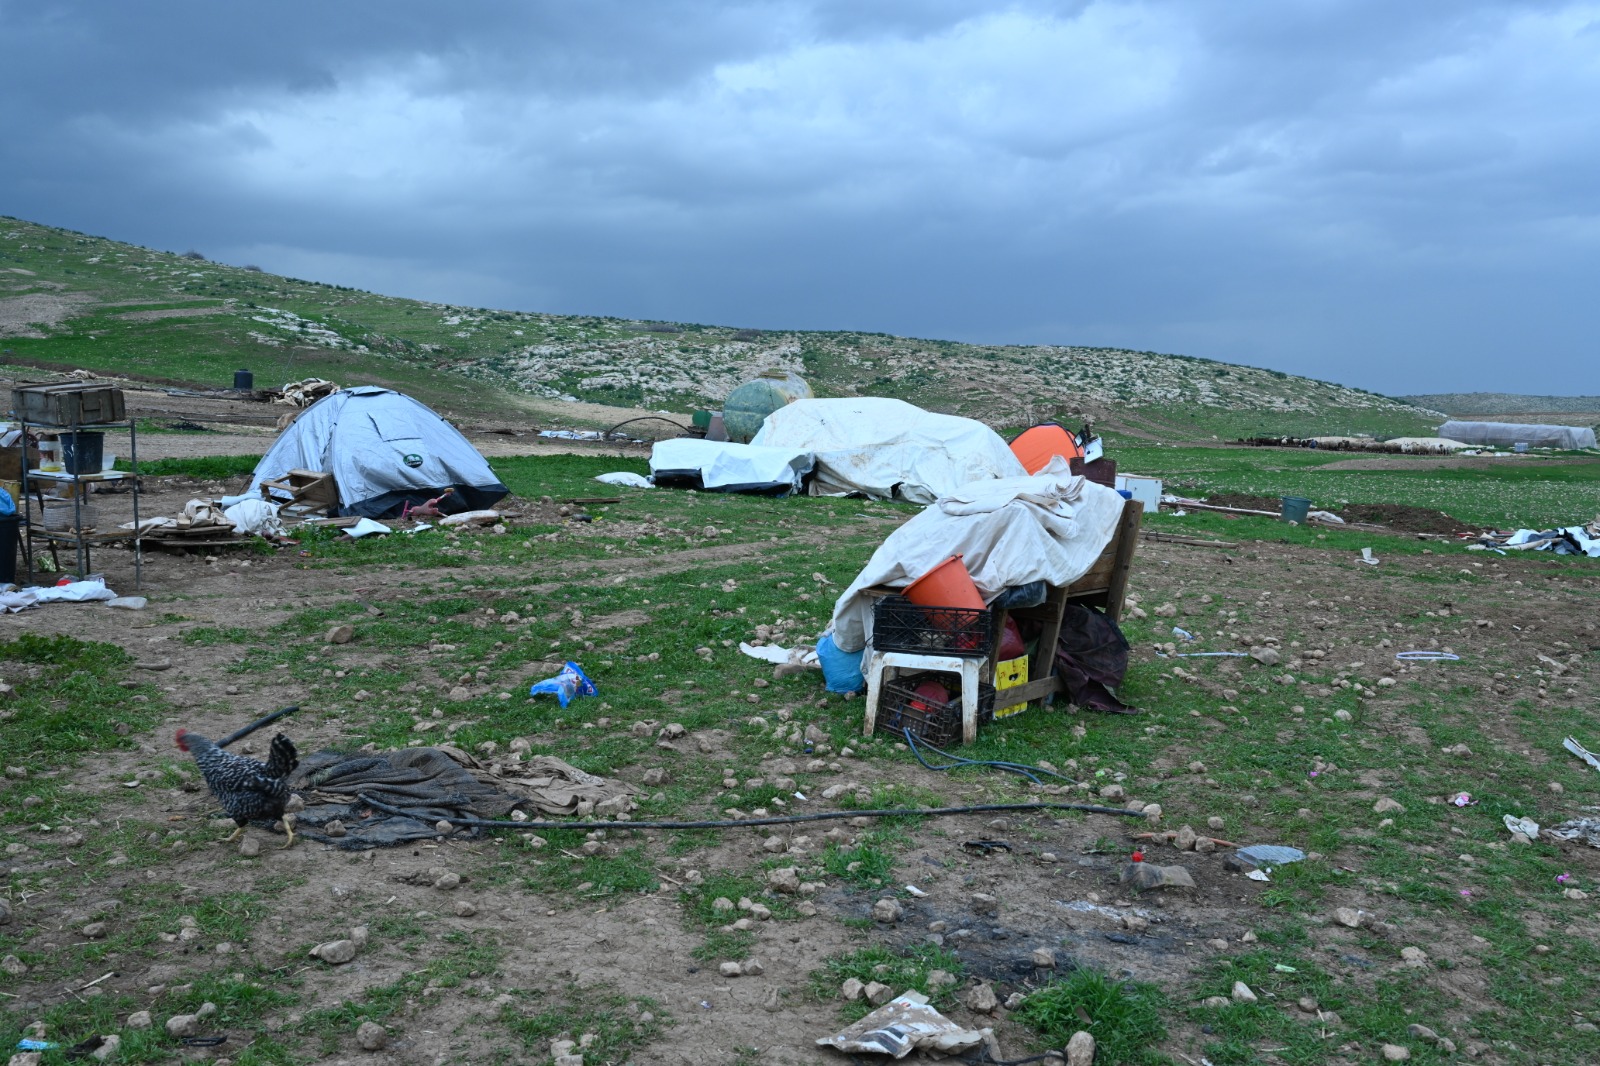 Remaining belongings in Humsa al Bqai’a on 4 February 2021, after this week’s demolitions and confiscations, along with a camping tent used by some of those displaced.